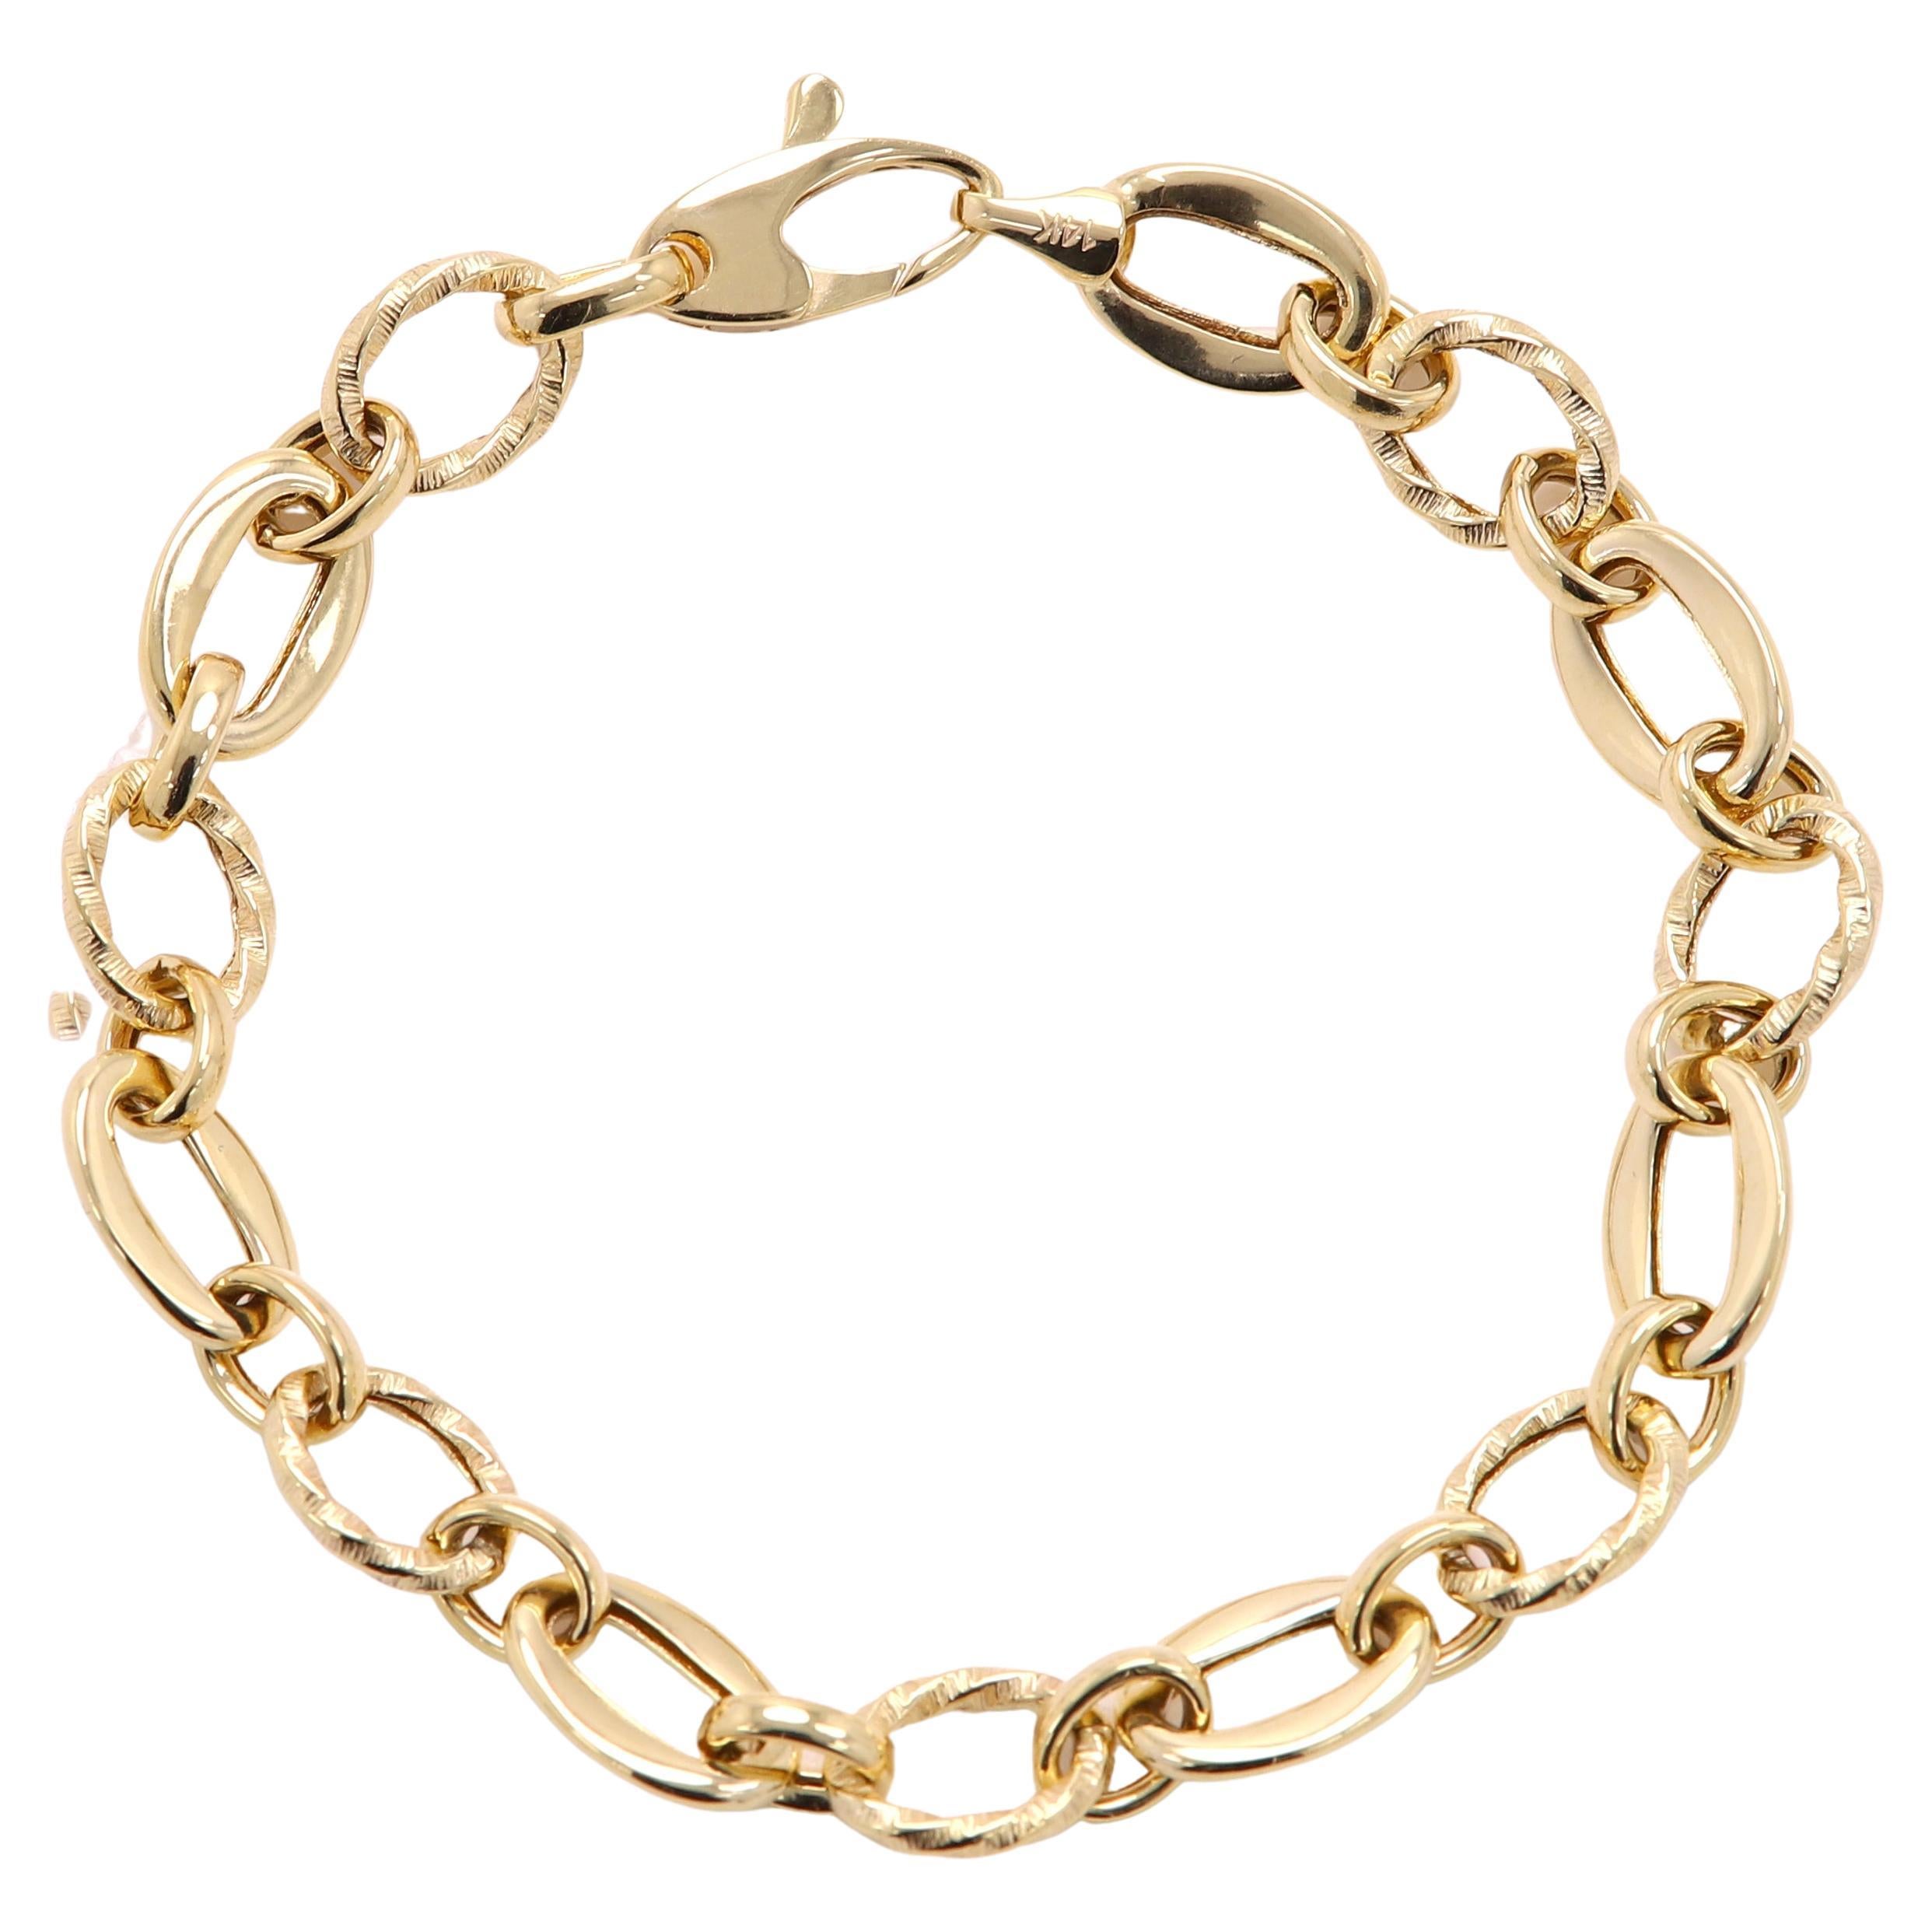 beautiful Link Bracelet -  well made and very trendy look.
14k yellow gold 4.90 grams.
Length; 7.5' Inch
made In Italy.
approx individual link size is average 10 x 7 mm
(looks better in real)
+Gift Box 